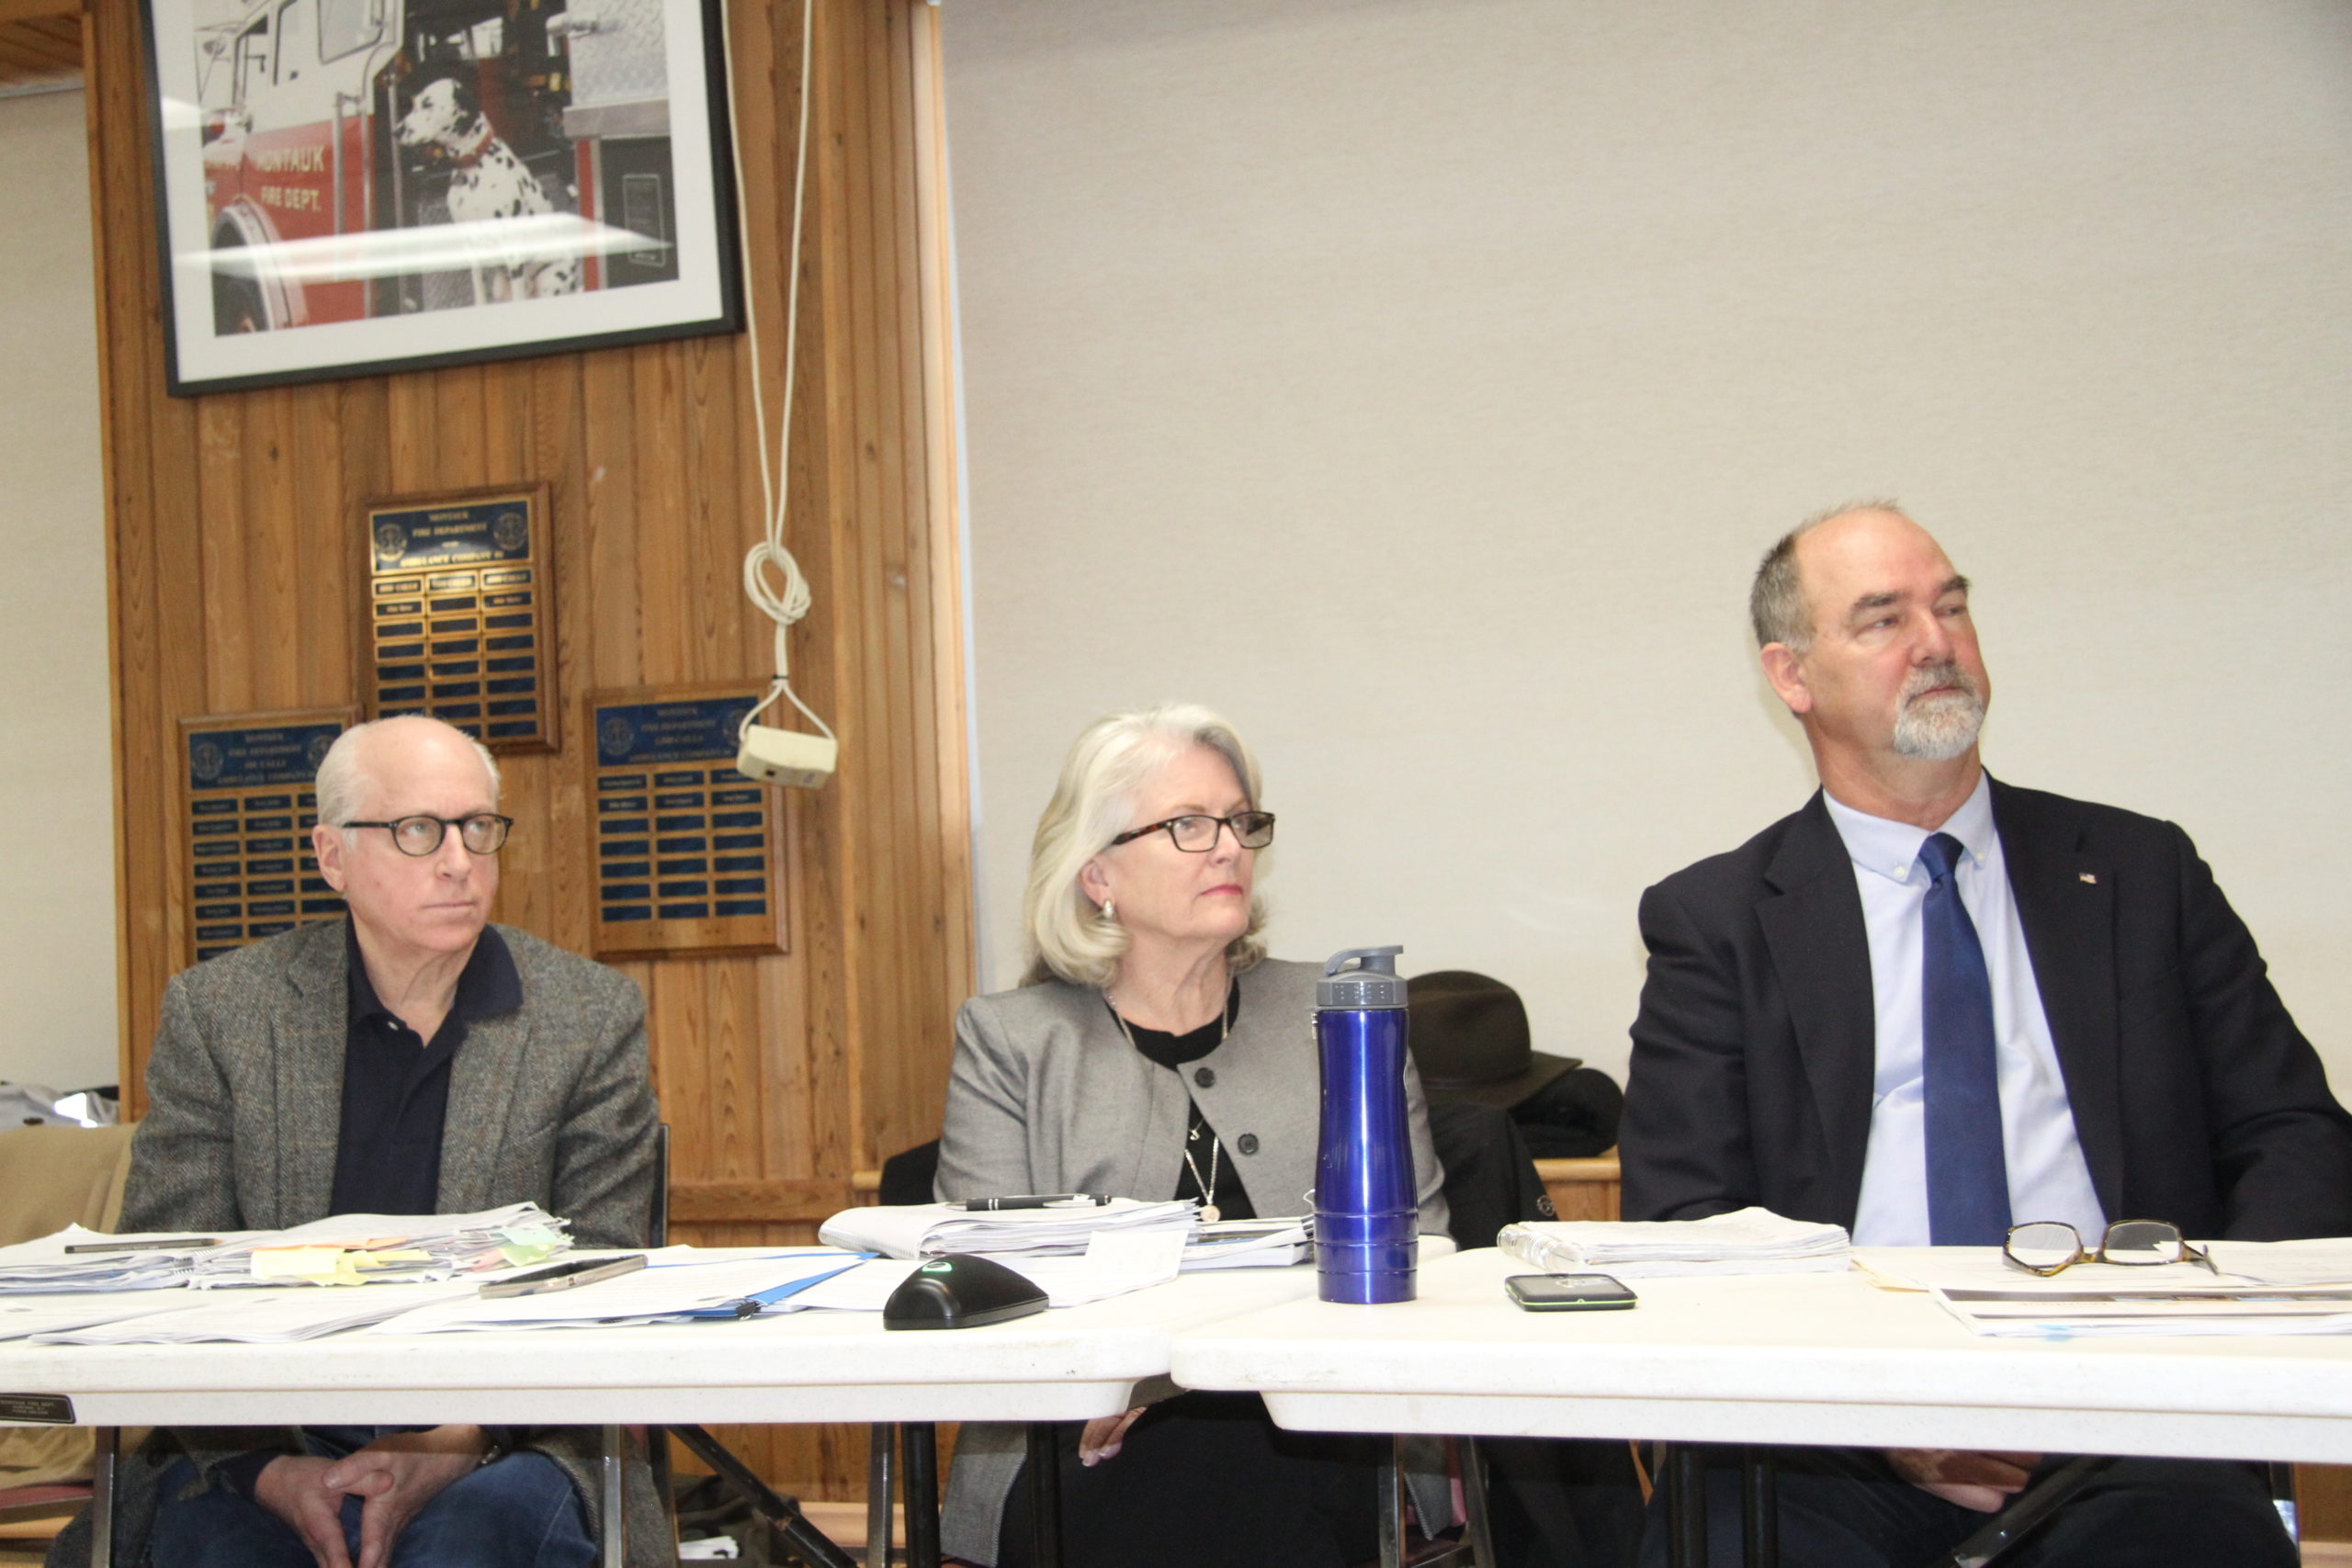 East Hampton Town Board members agreed that the guidance about retreat from the oceanfront should be softened in the Montauk hamlet study. 